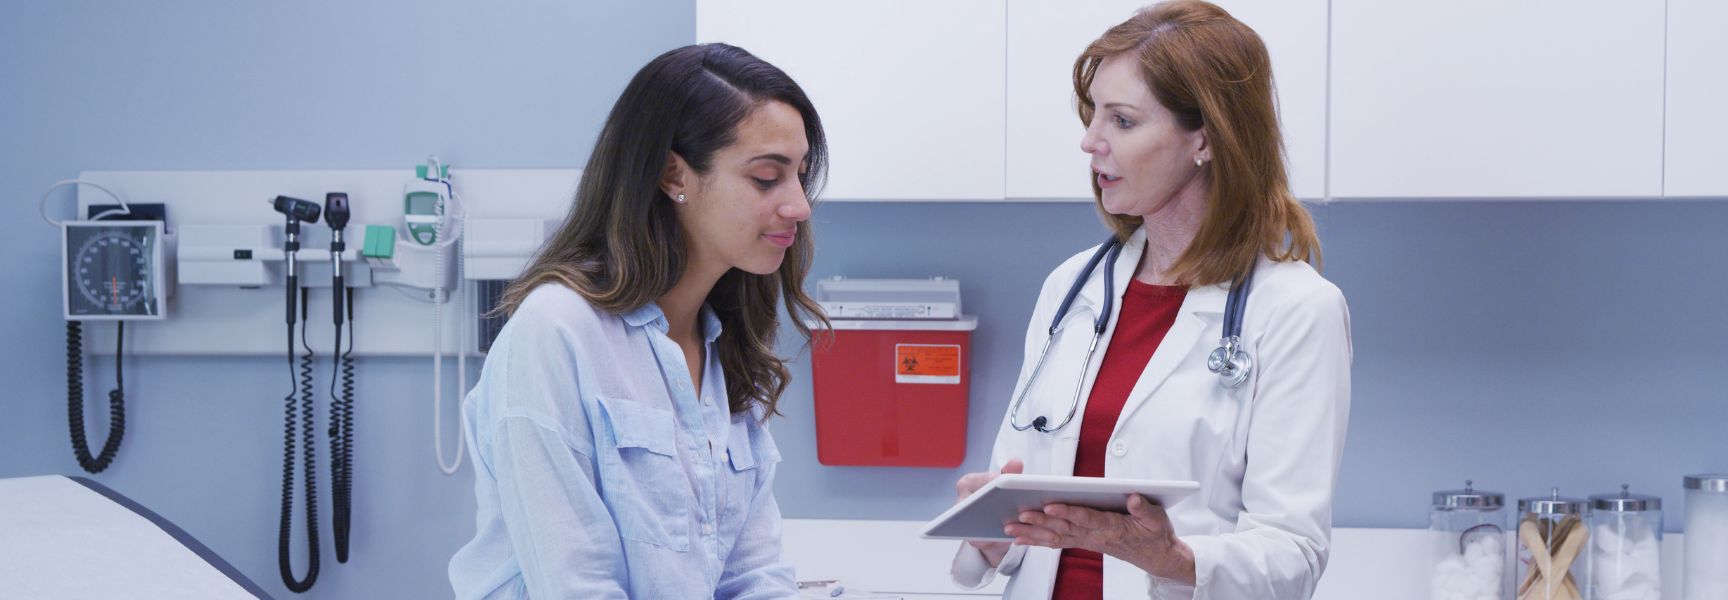 young woman talking to a doctor